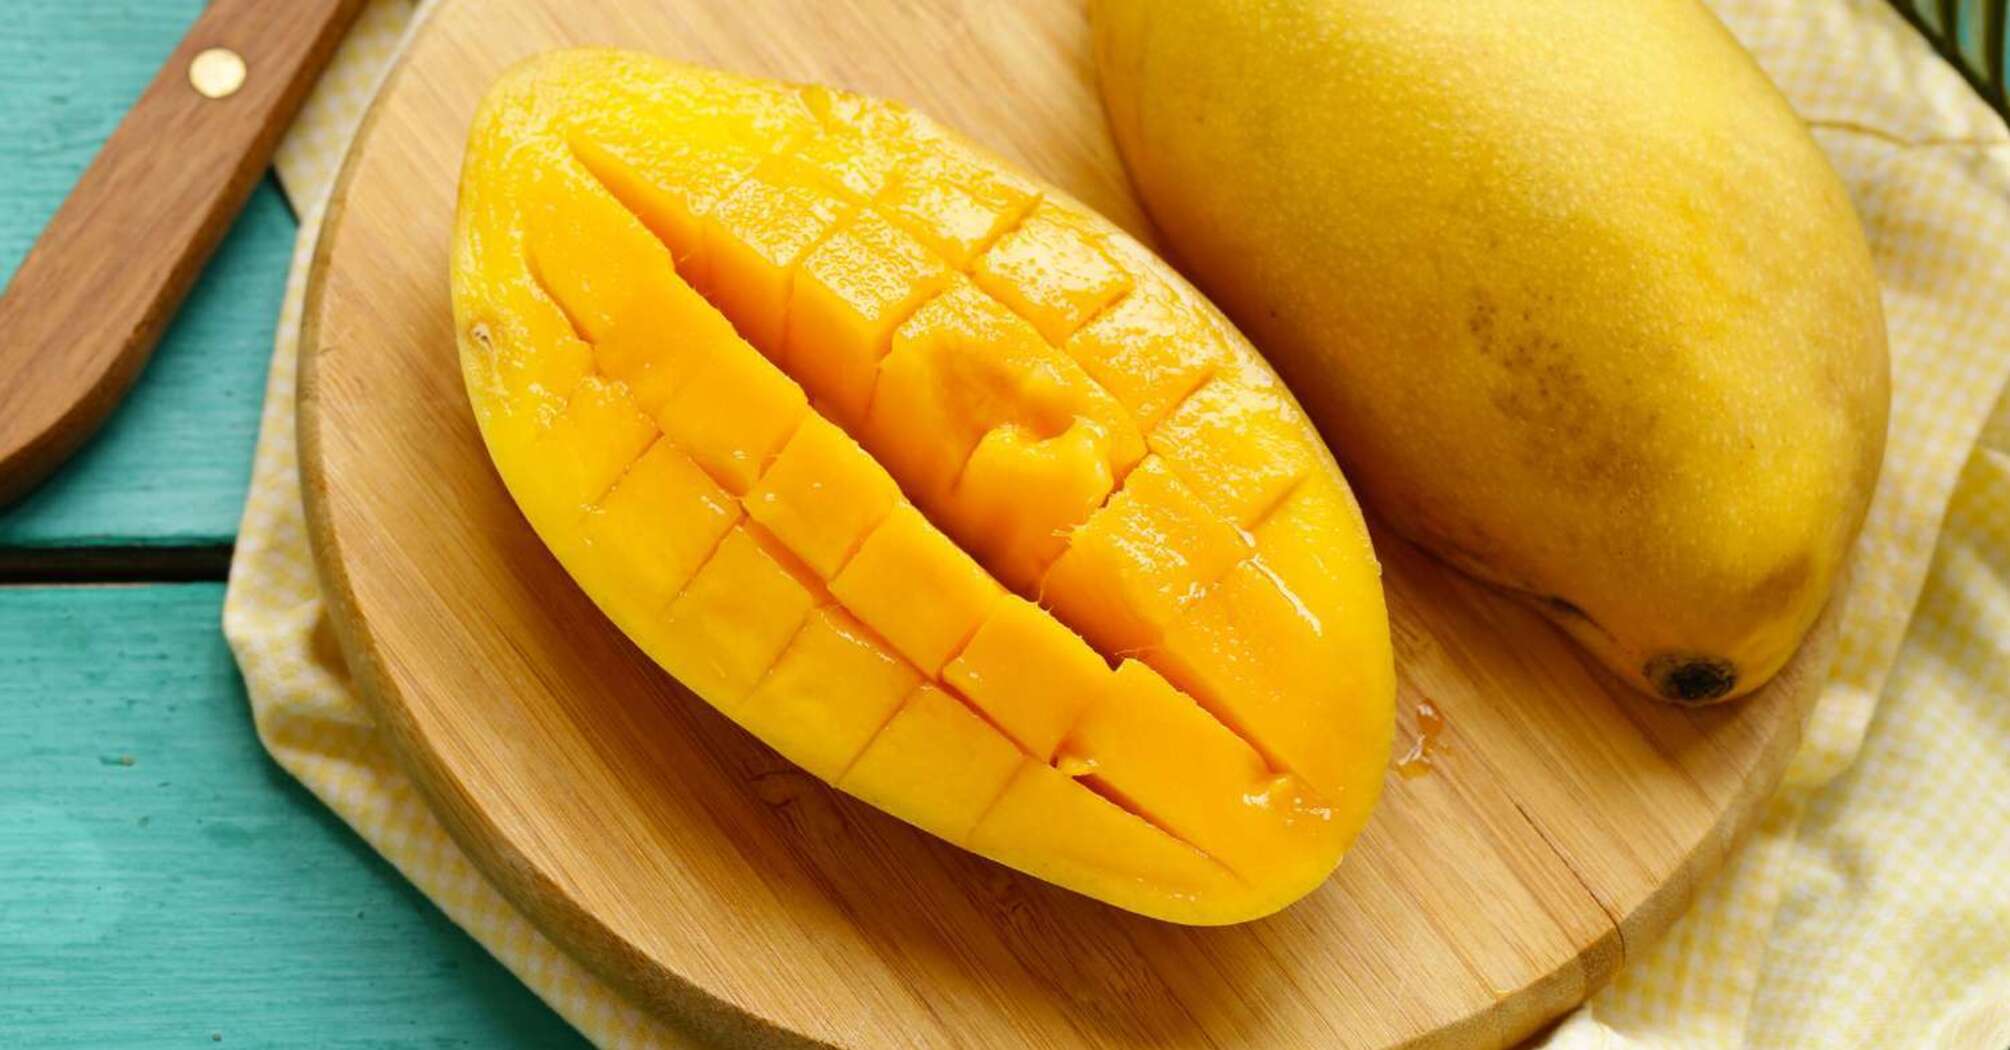 Effective method to determine if a mango is ripe